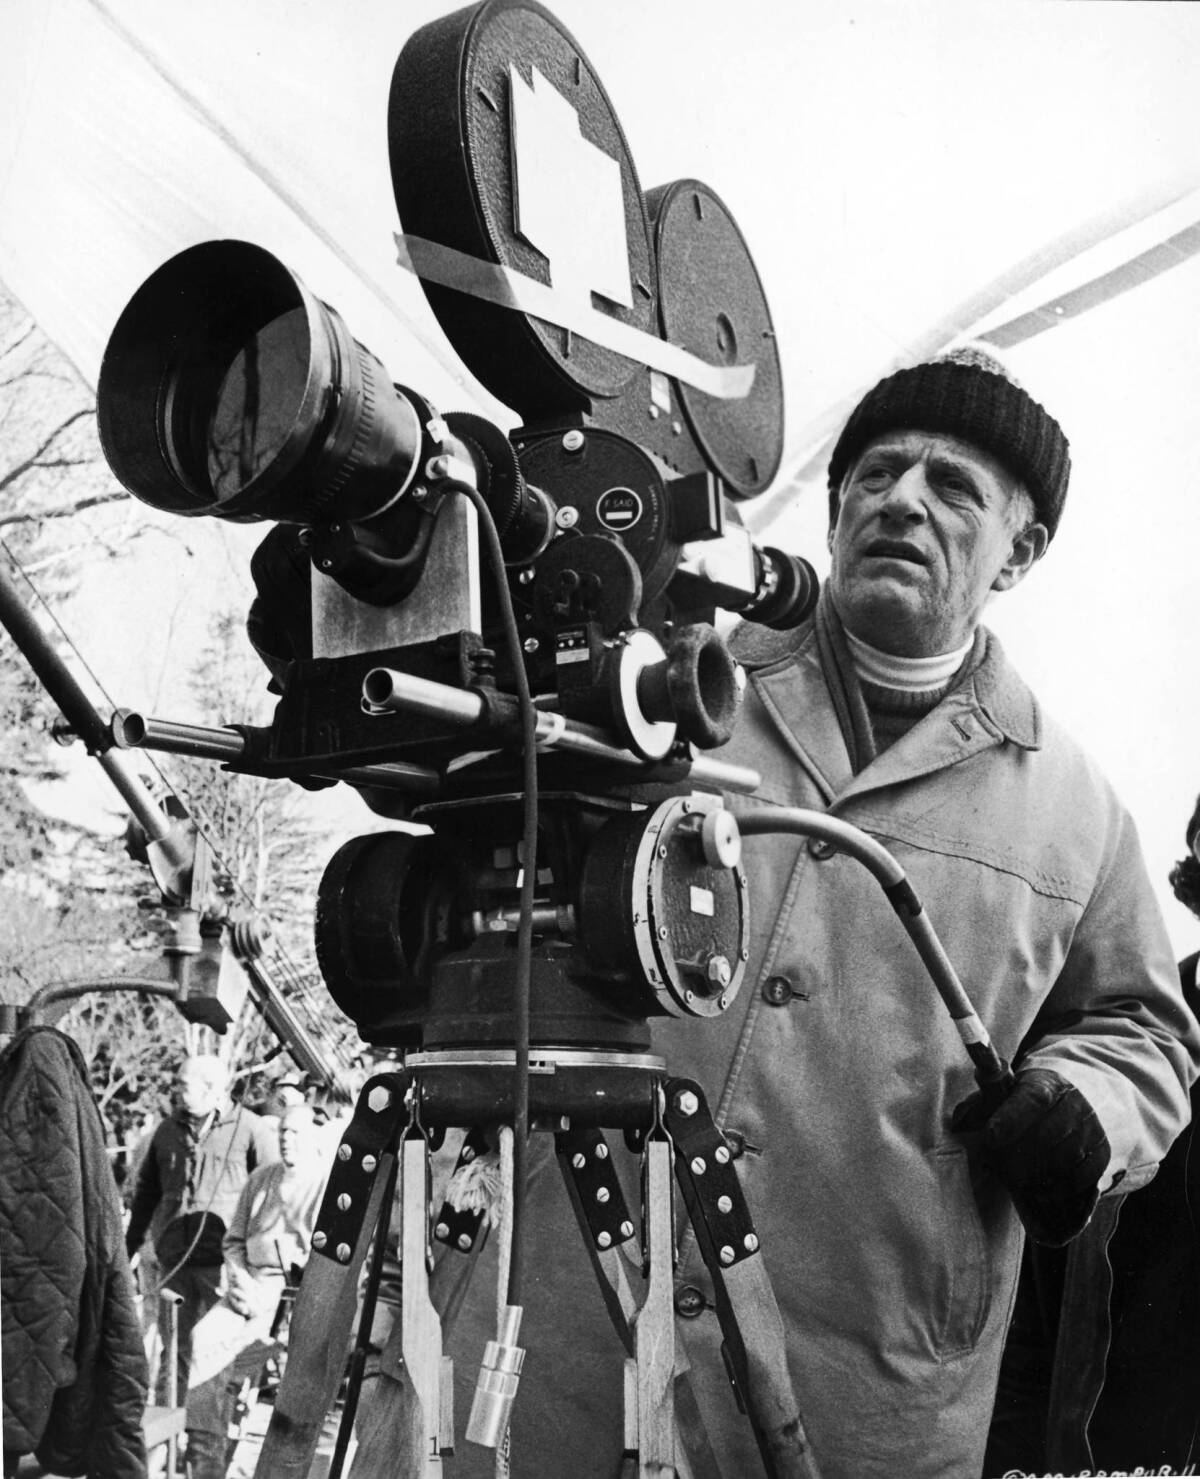 Diector and producer Stanley Kramer on the set of his film "R.P.M."